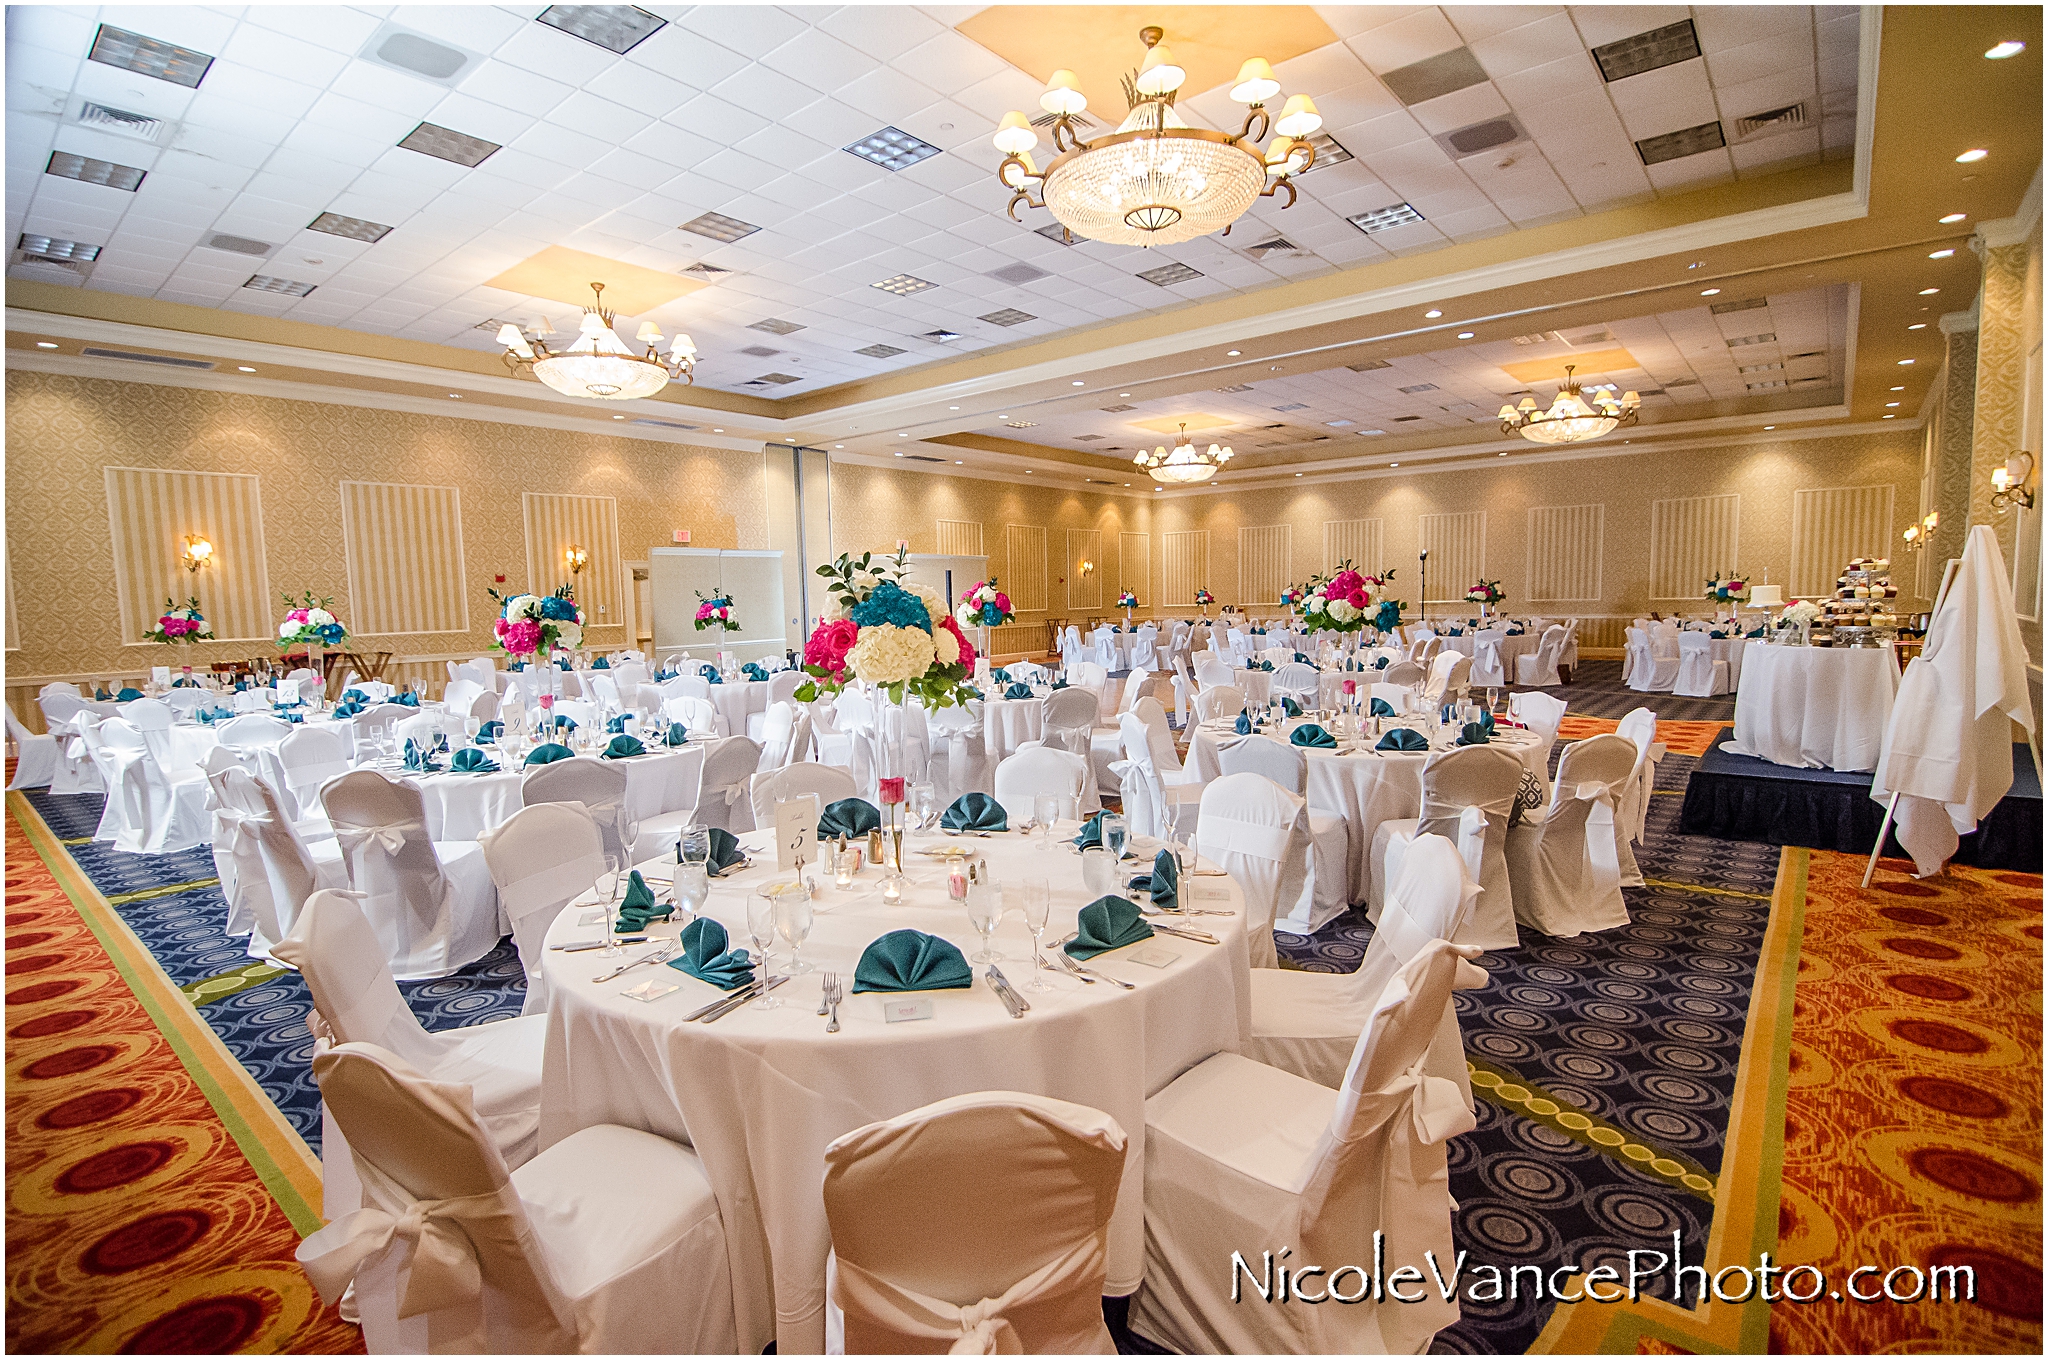 The reception is all set up in the ballroom at Virginia Crossings.